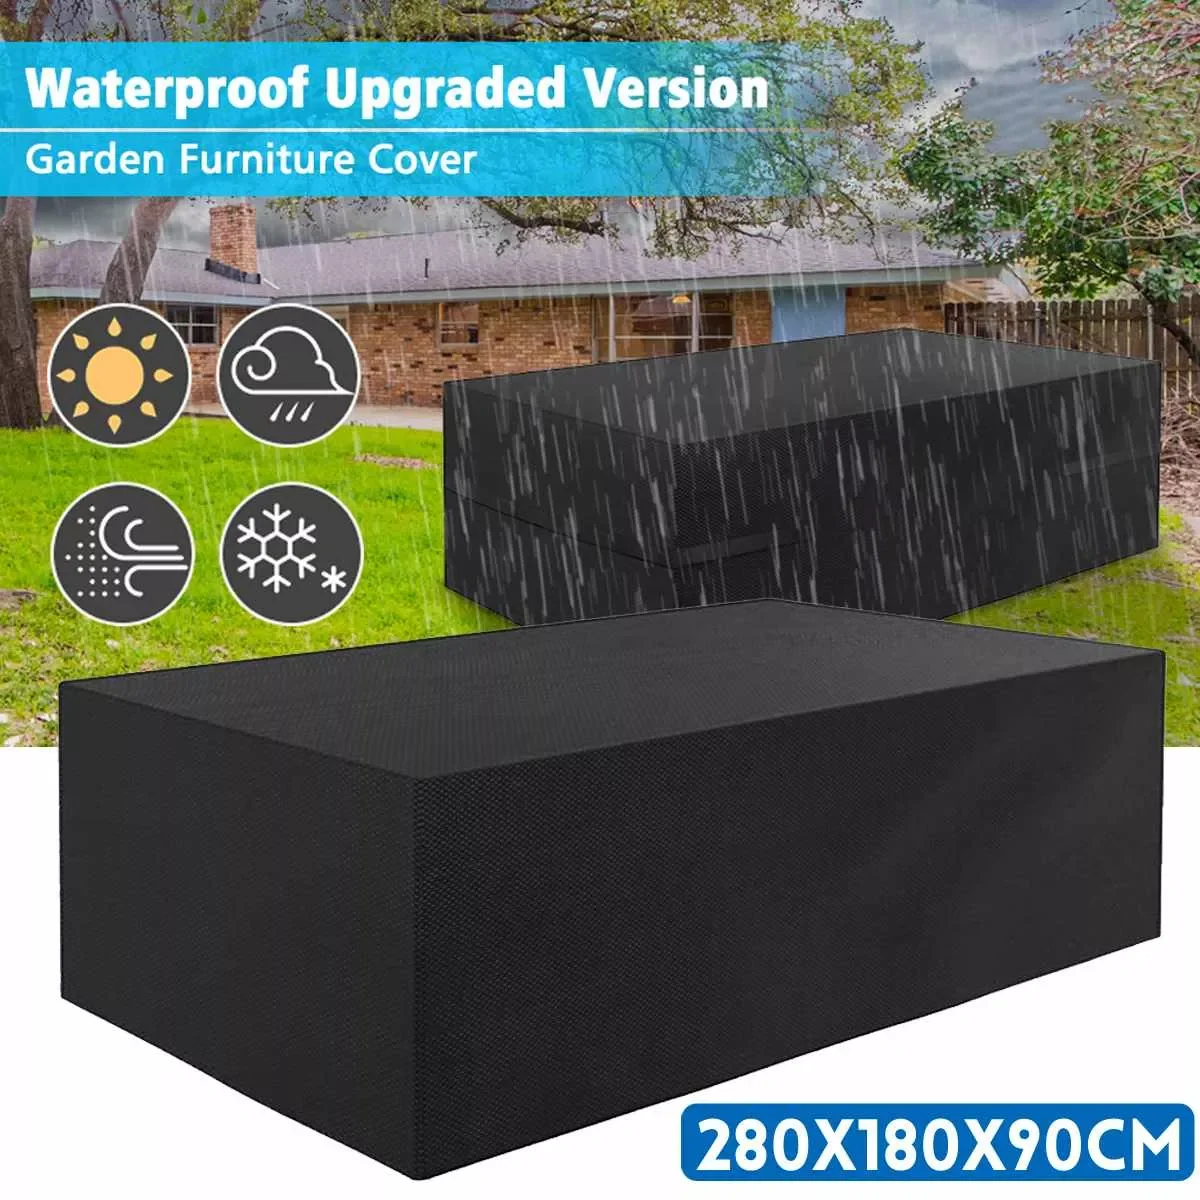 

420D Waterproof Garden Furniture Cover Outdoor Dustproof for Patio Sofa Table Chairs Bench Rain Snow Dustproof Protective Cover